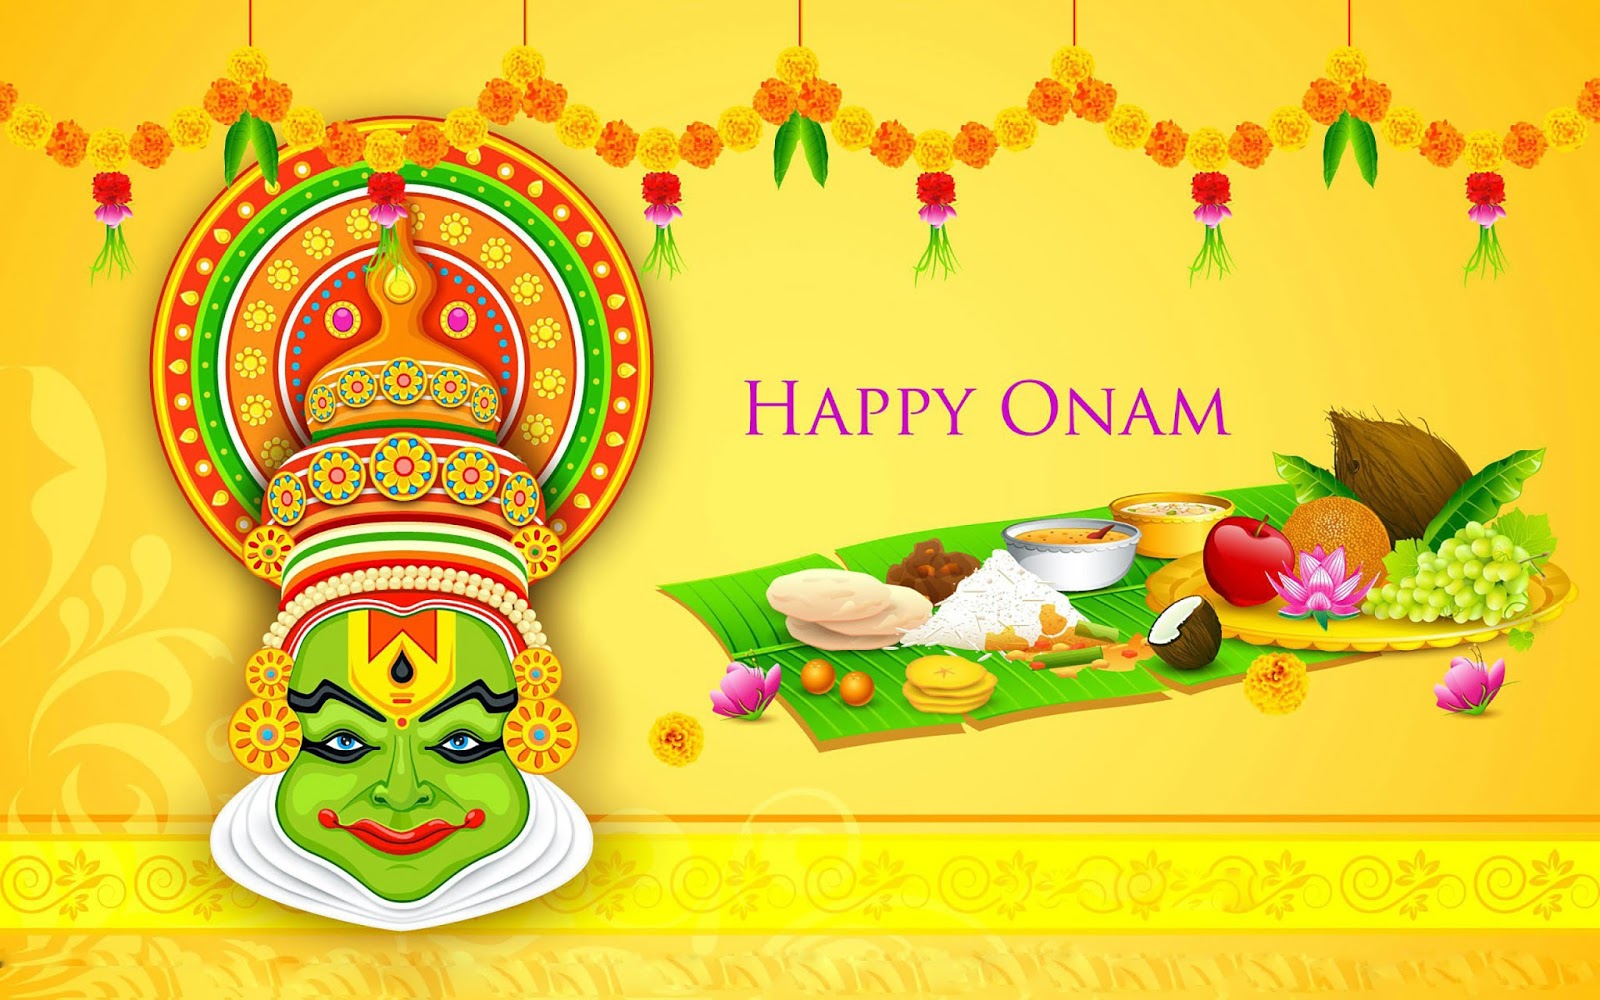 Happy Onam Wishes Gretting Cards Wallpaper